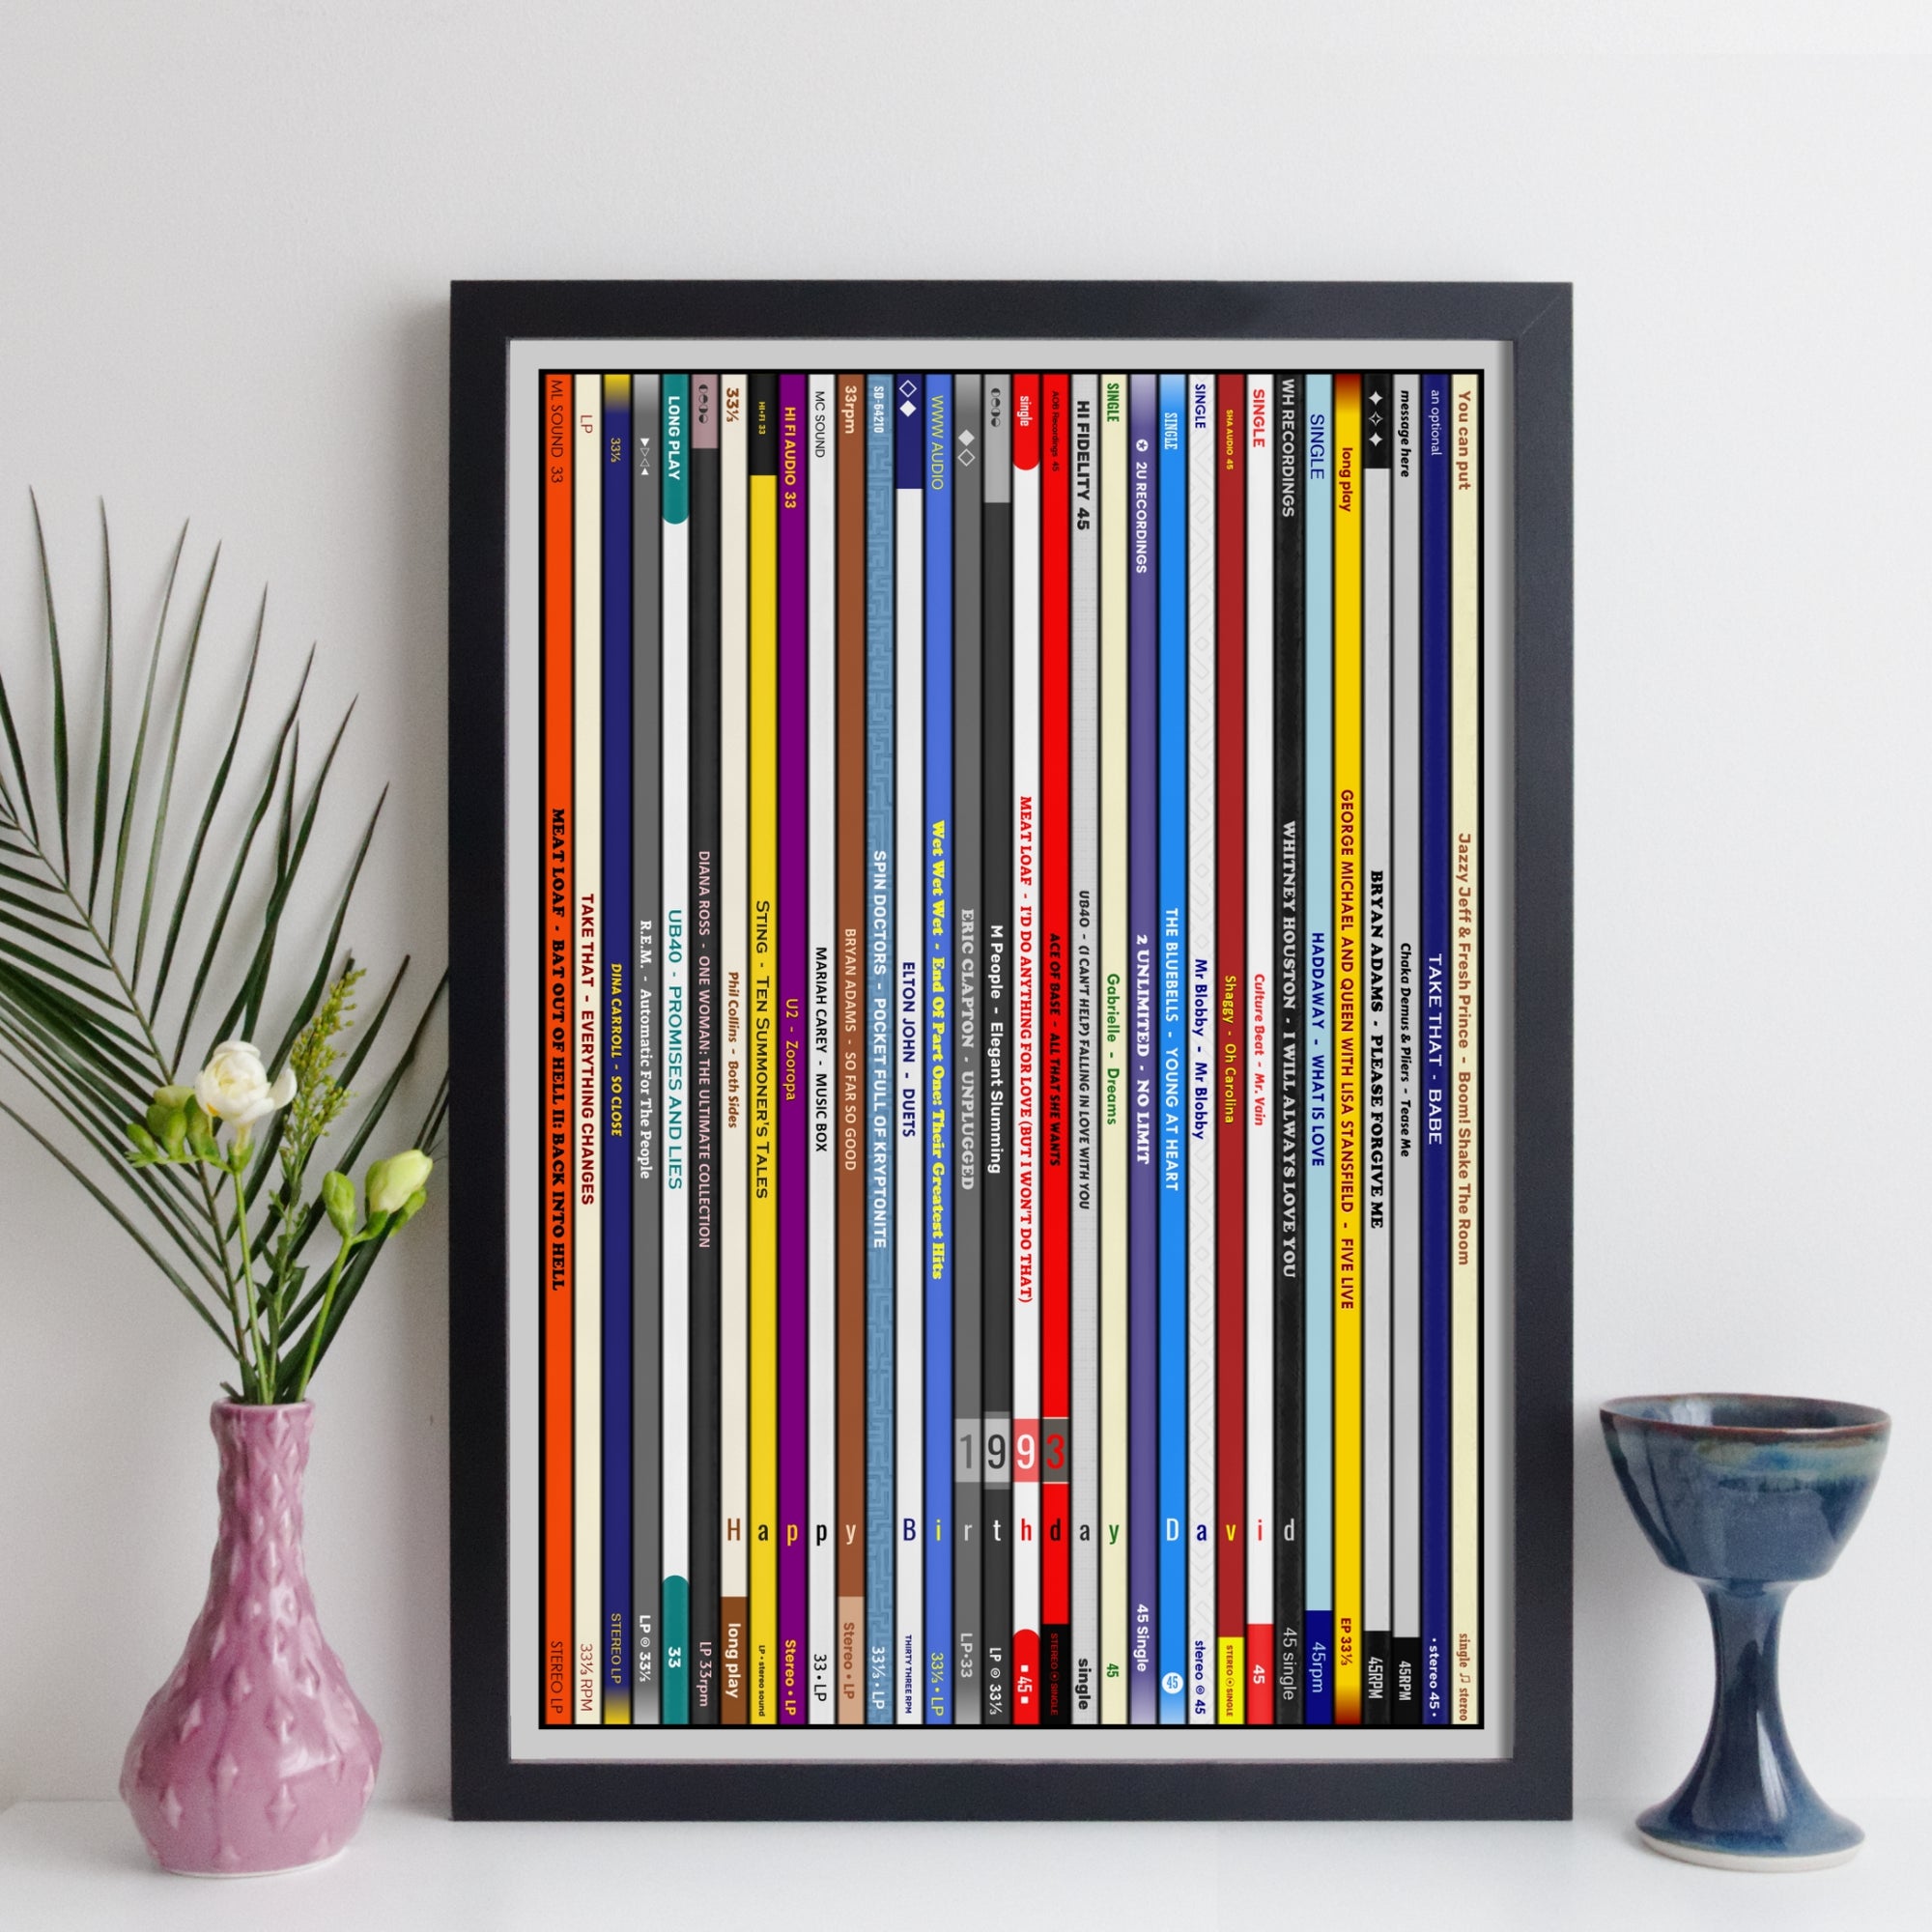 Personalised Music Print - 1993 UK Record Collection Print - 1993 birthday gift idea